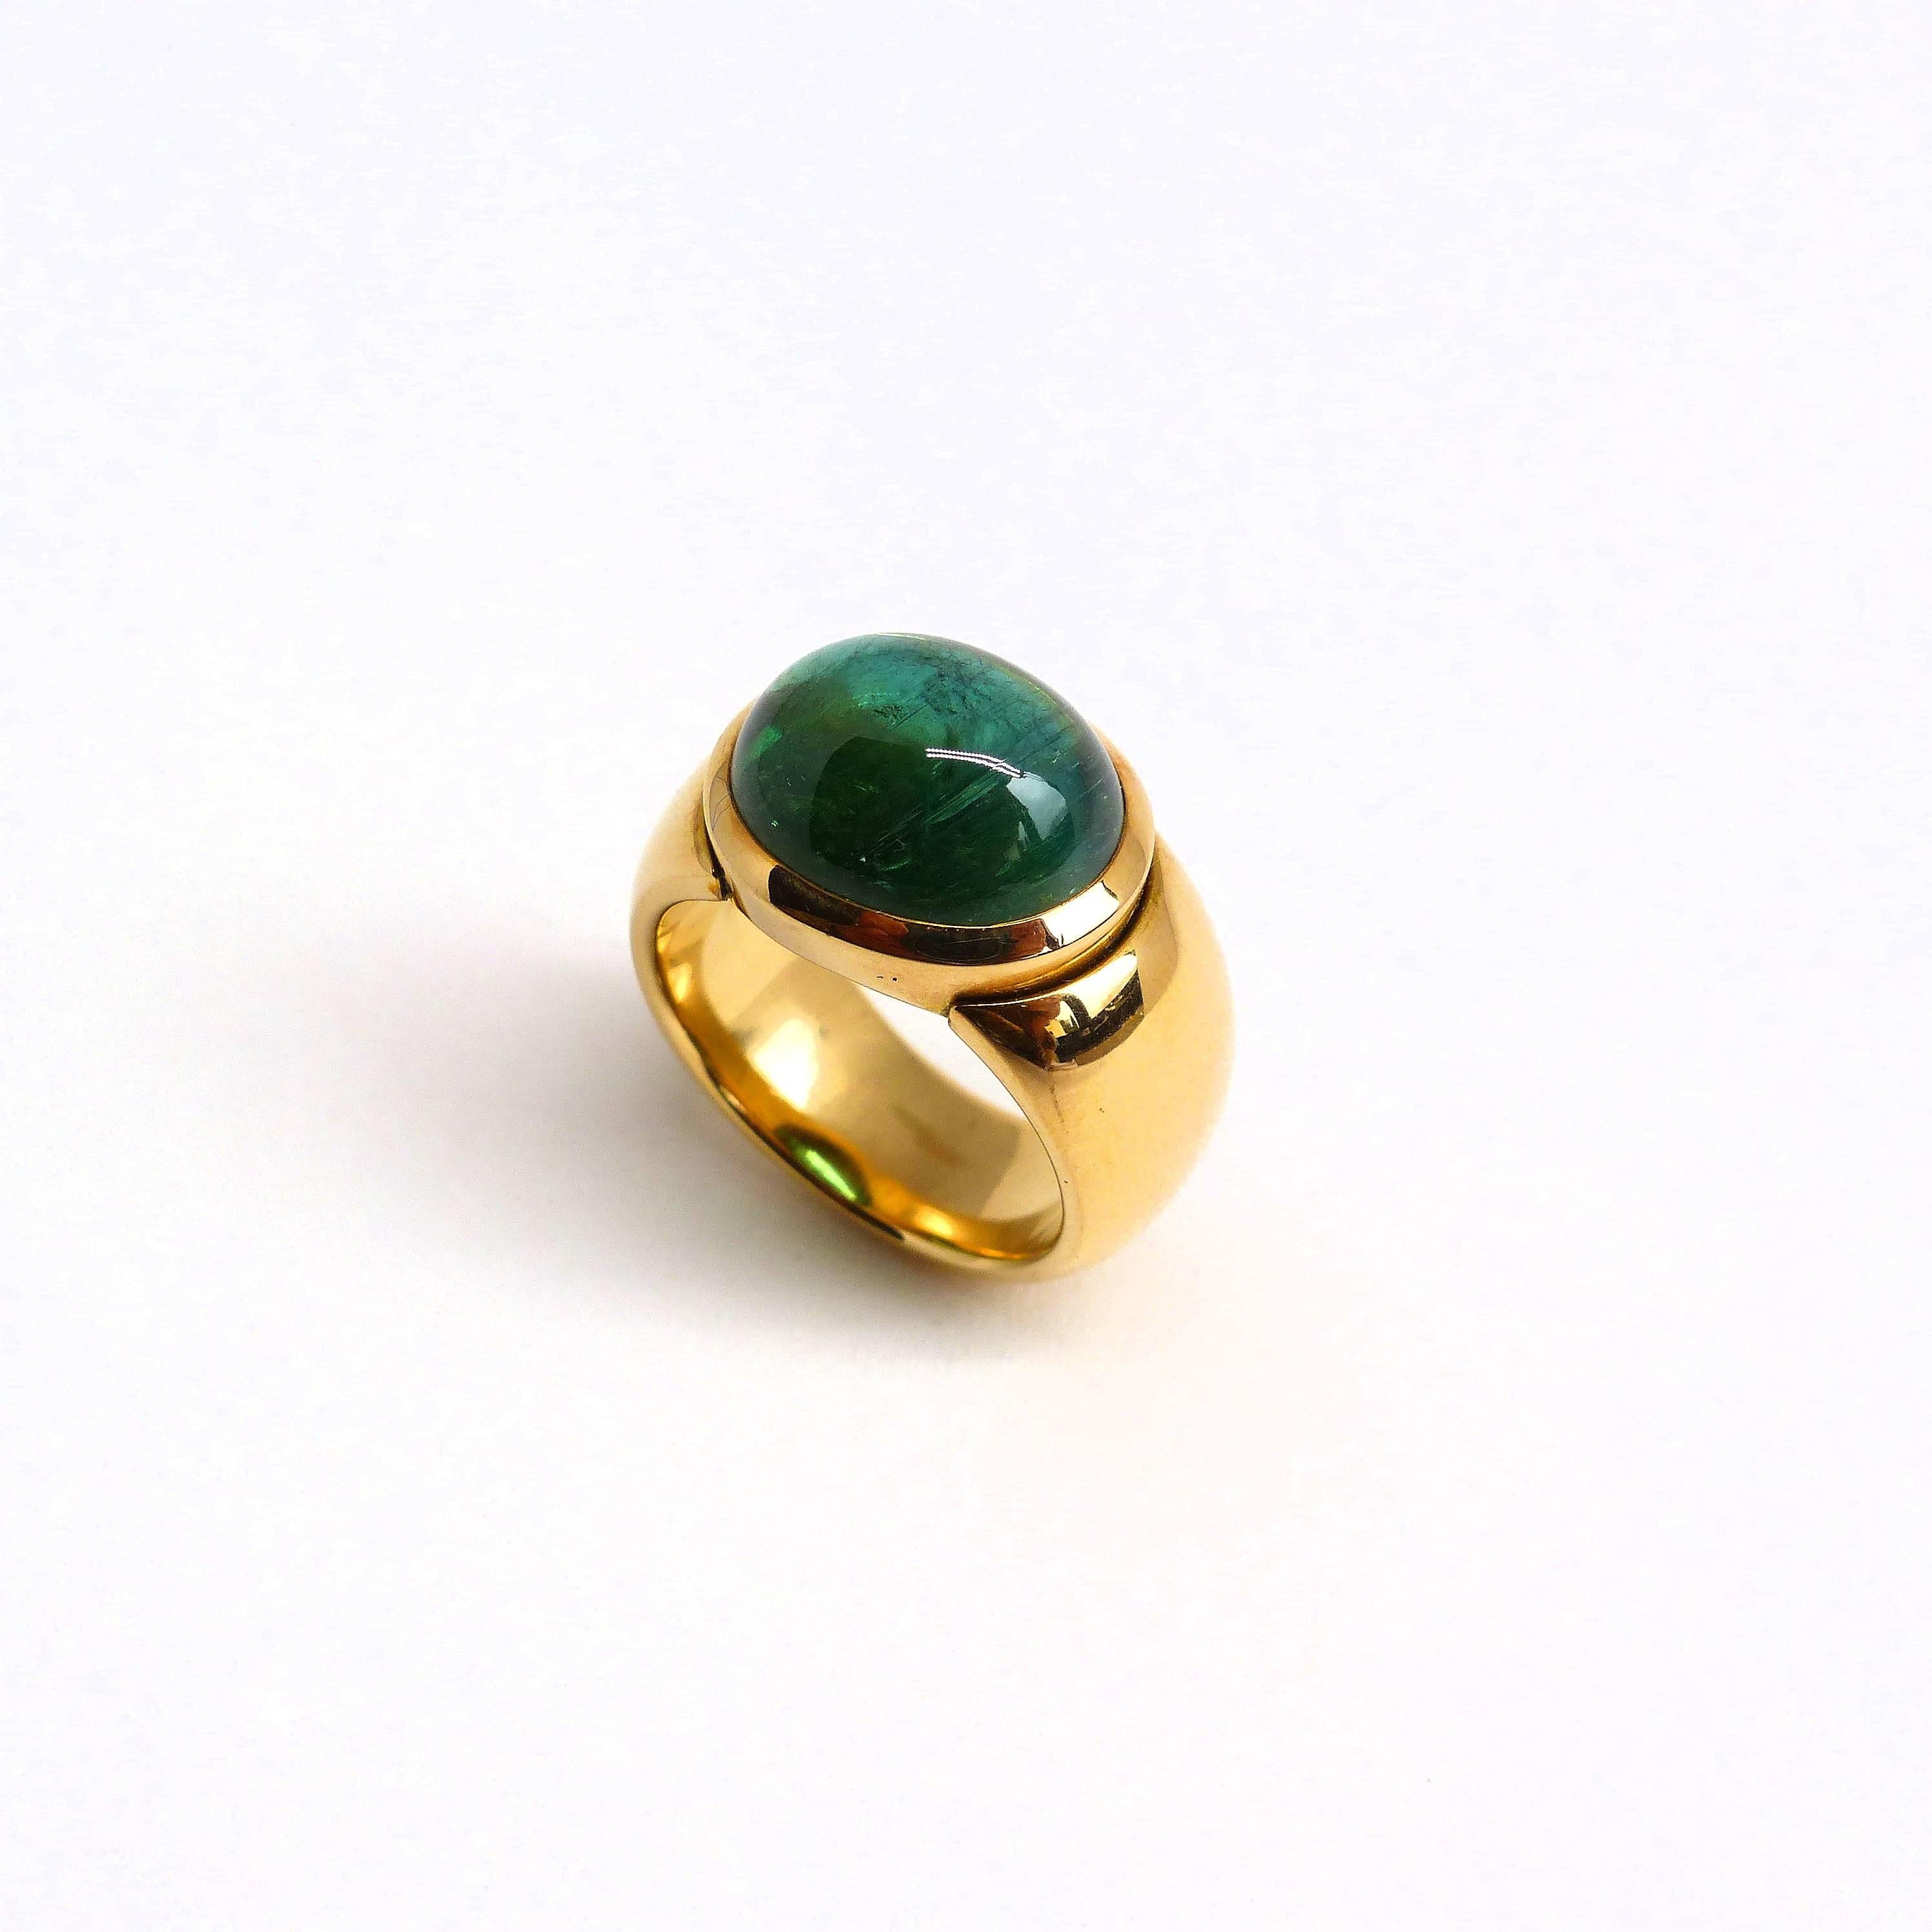 Thomas Leyser is renowned for his contemporary jewellery designs utilizing fine gemstones. 

This 18k rose gold ring (19.53g) is set with 1x fine Green Tourmaline Cabouchon (oval, 13.5x11mm, 8.06cts). 

Ringsize: 6 1/2 (53.5).
